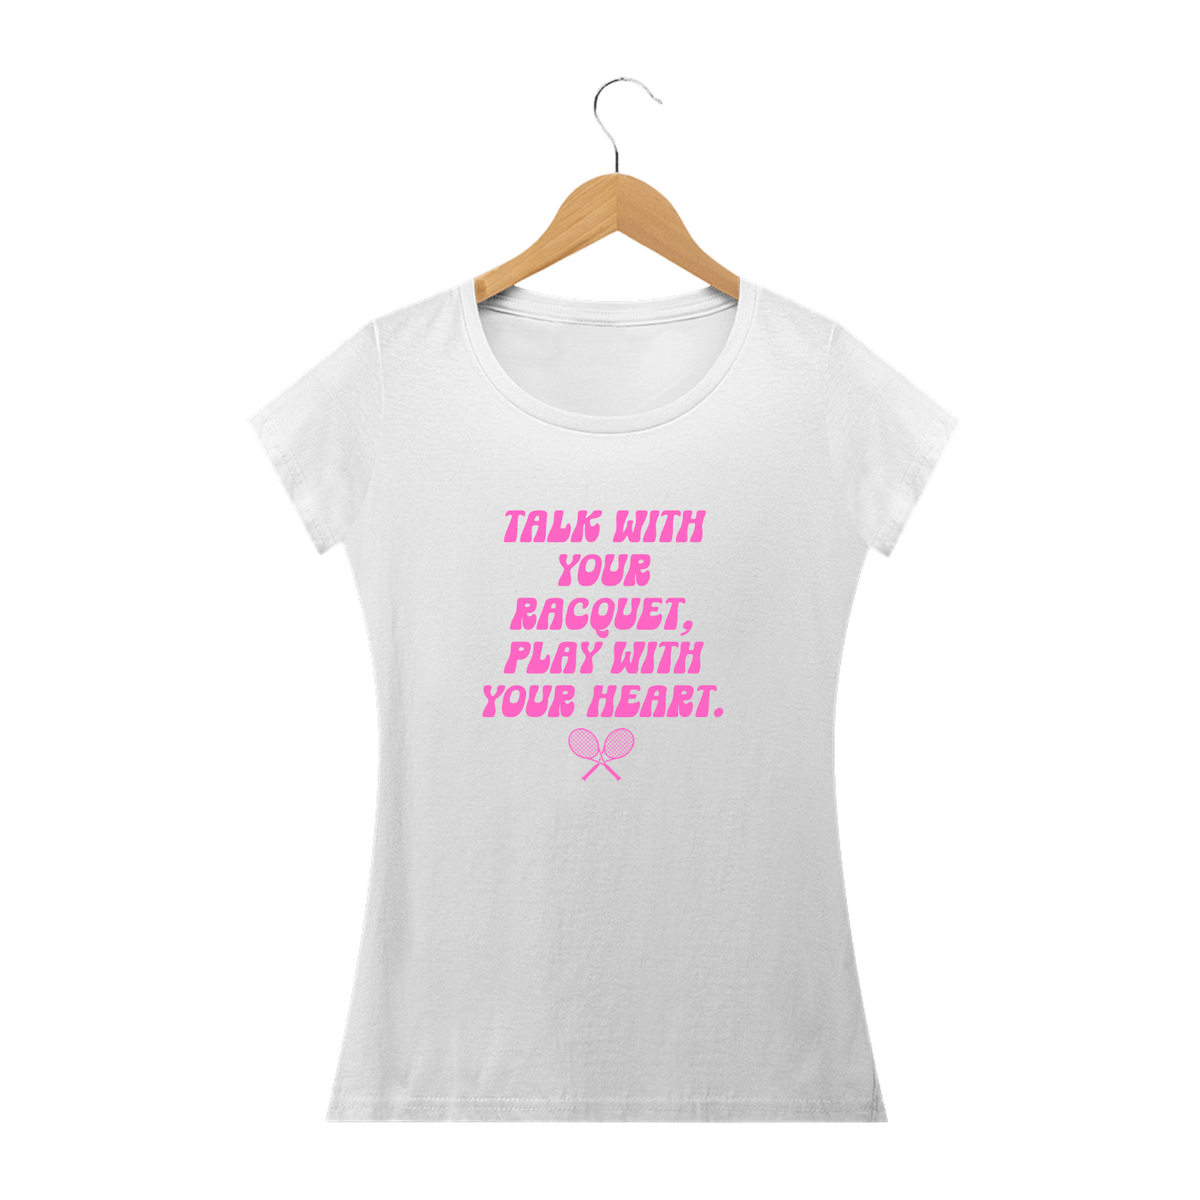 Nome do produto: CAMISETA BABY LONG Talk with your racquet, play with your heart.